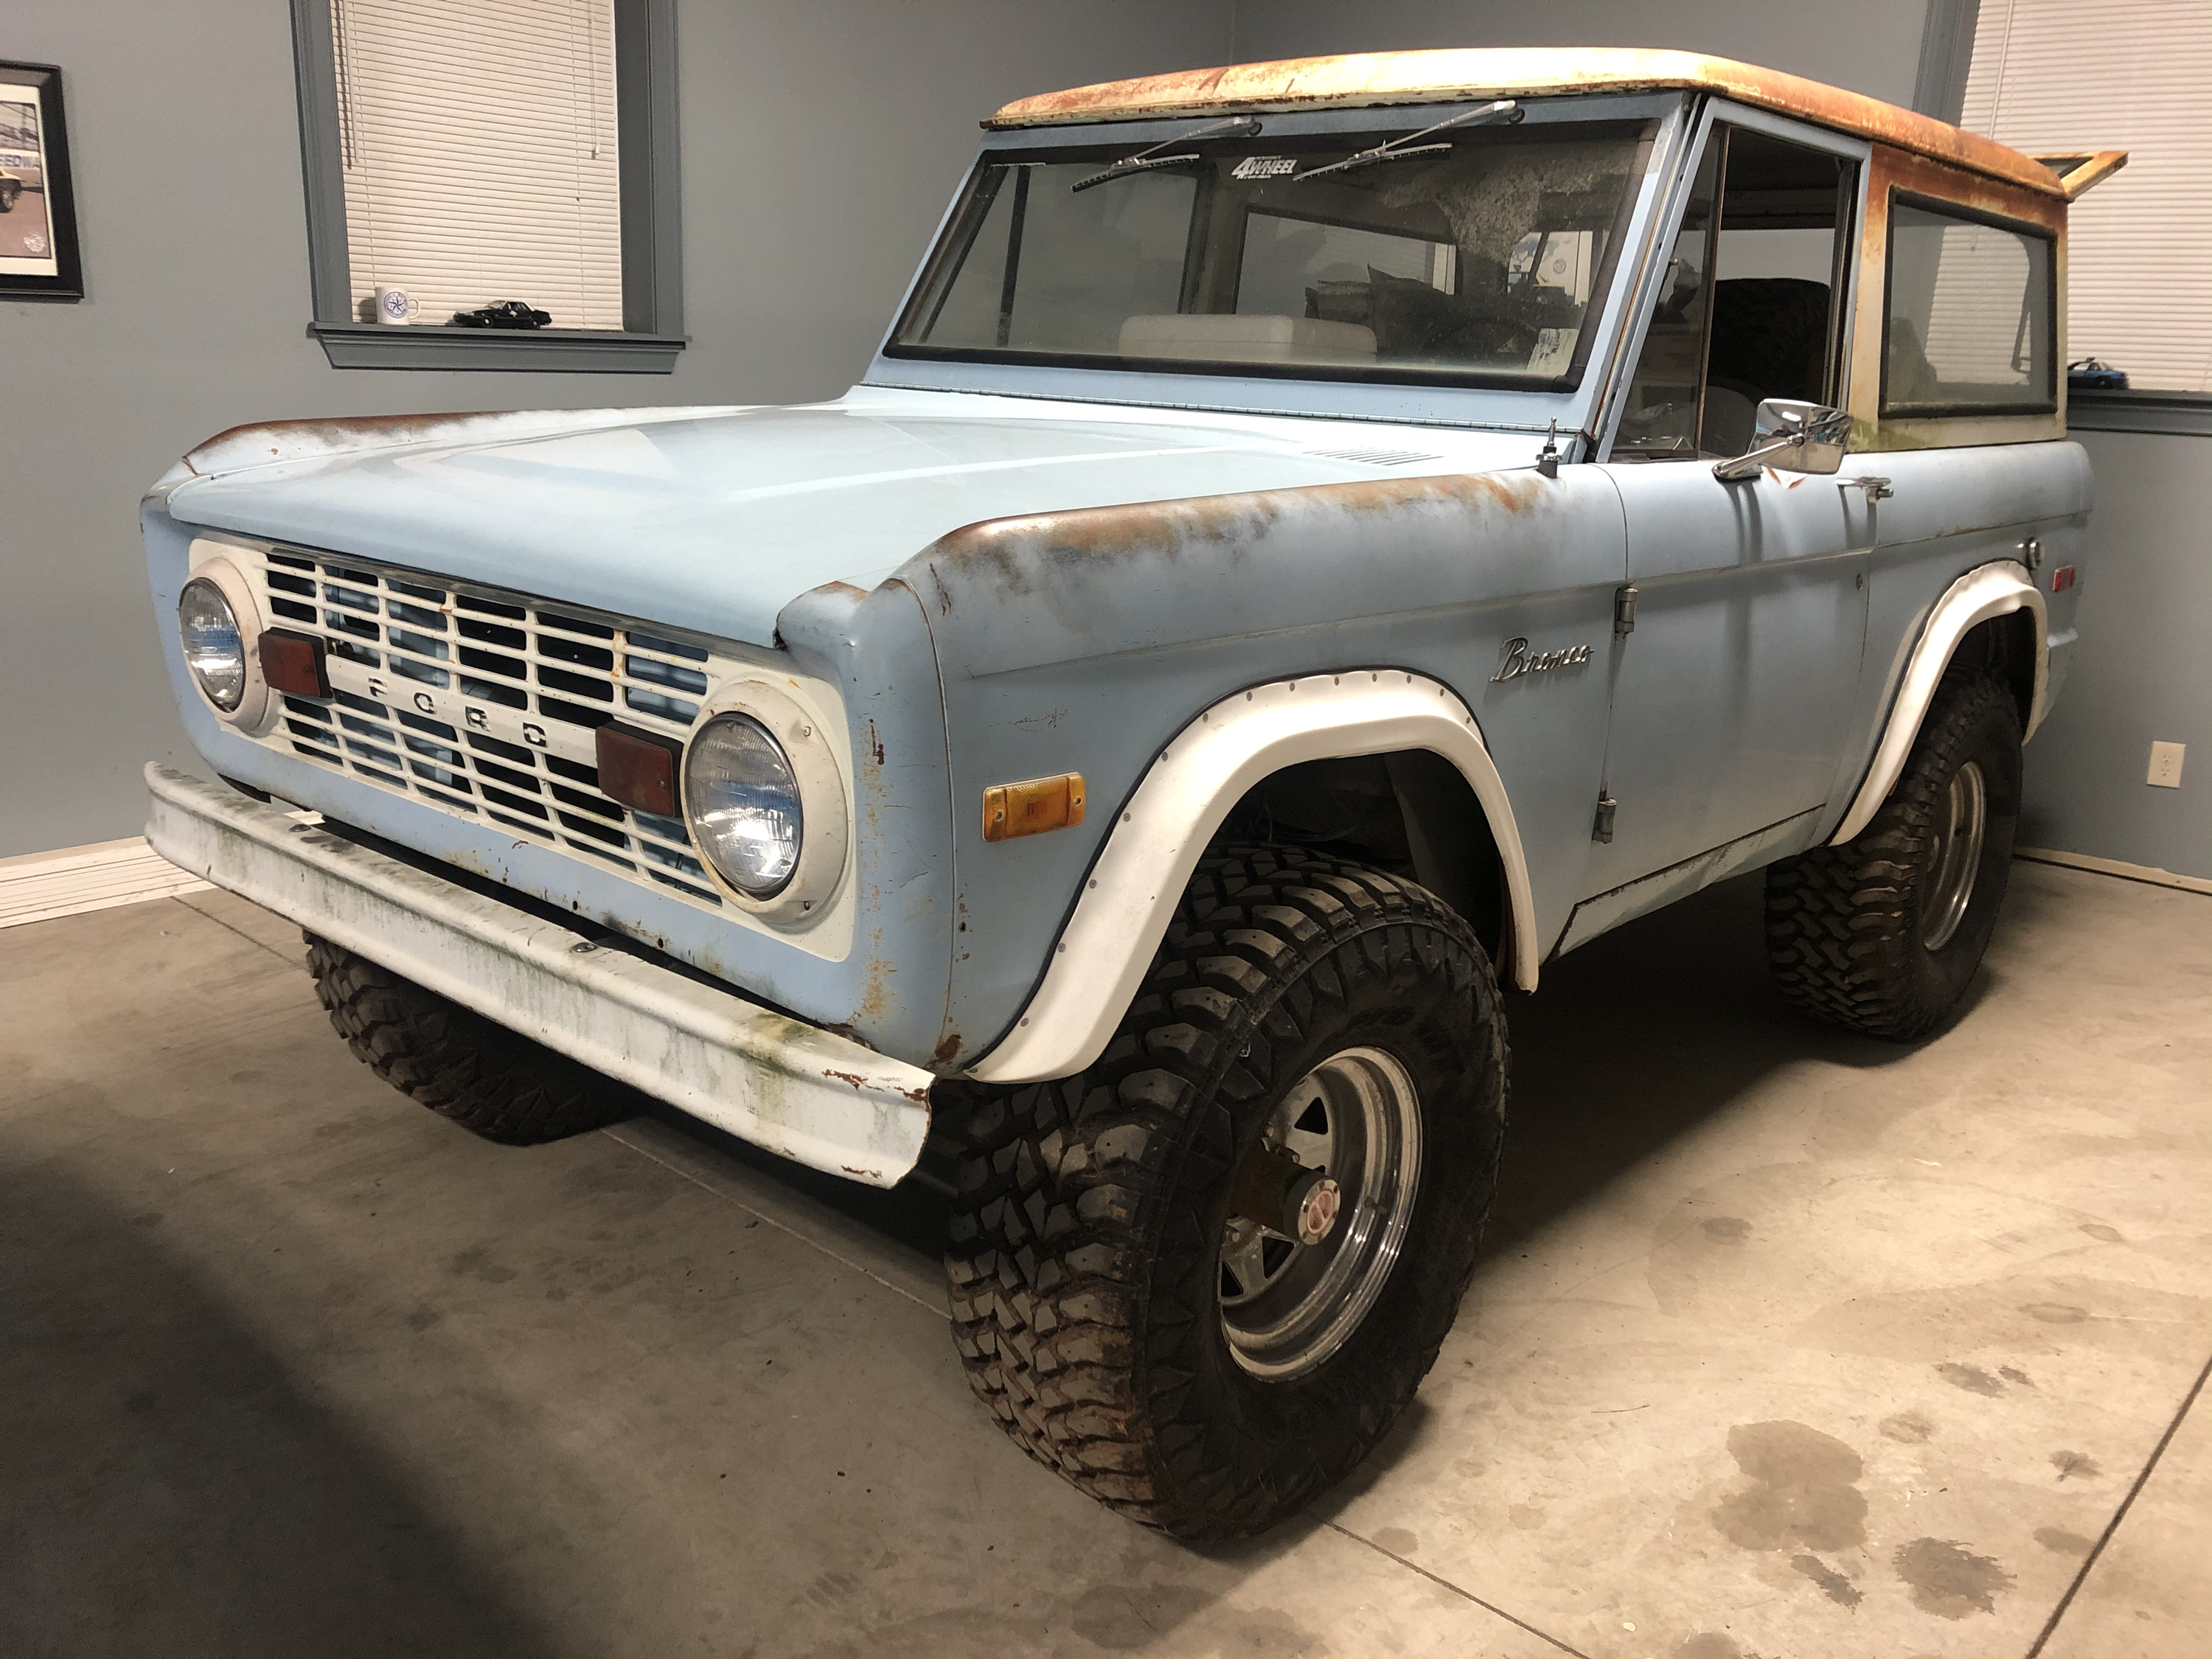 Ford Bronco Early peek @ ROBINS EGG BLUE 2023 Bronco Color, Heritage Edition w/ Squared Flares and Painted MOD Hard Top! tempImagear9HSI